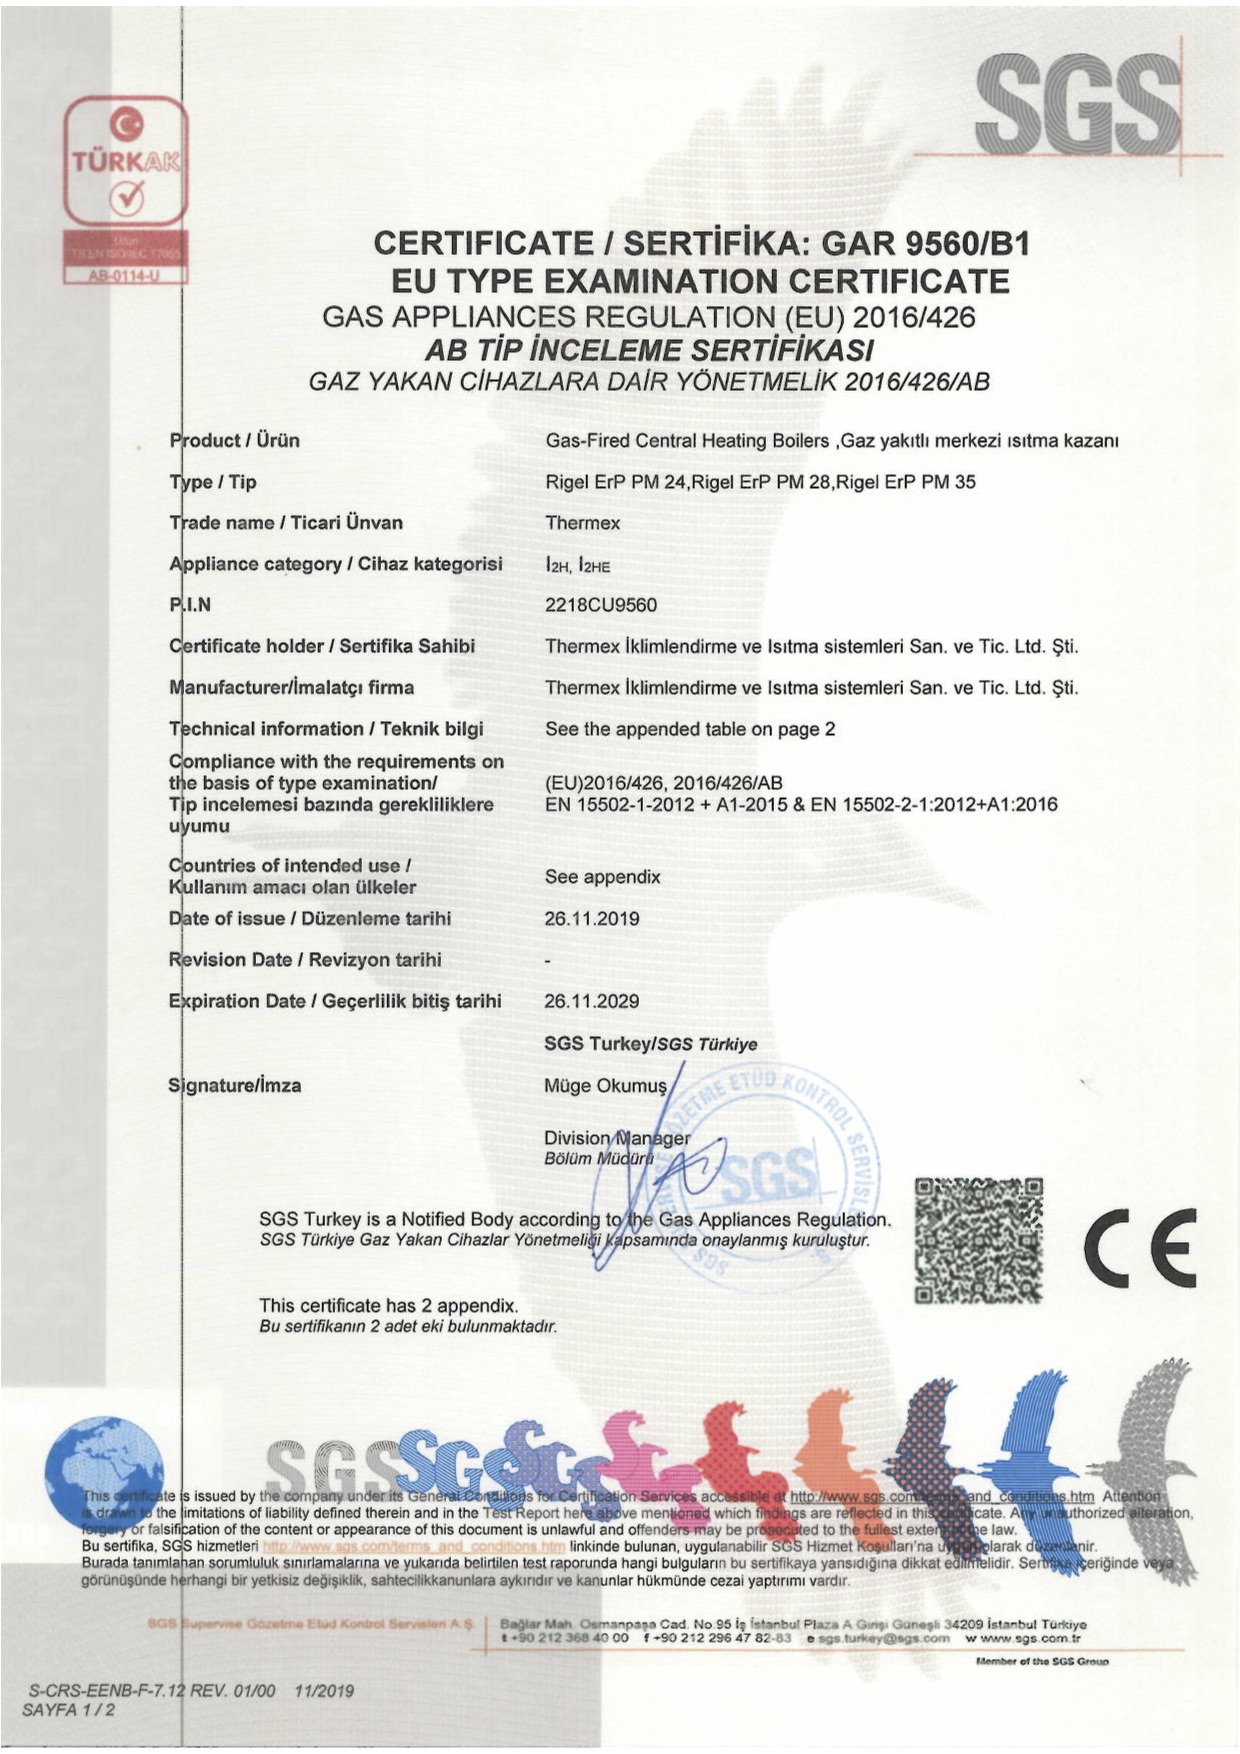 S-CRS-EE-F-31-Certificate-REV0200-thermex-RIGEL